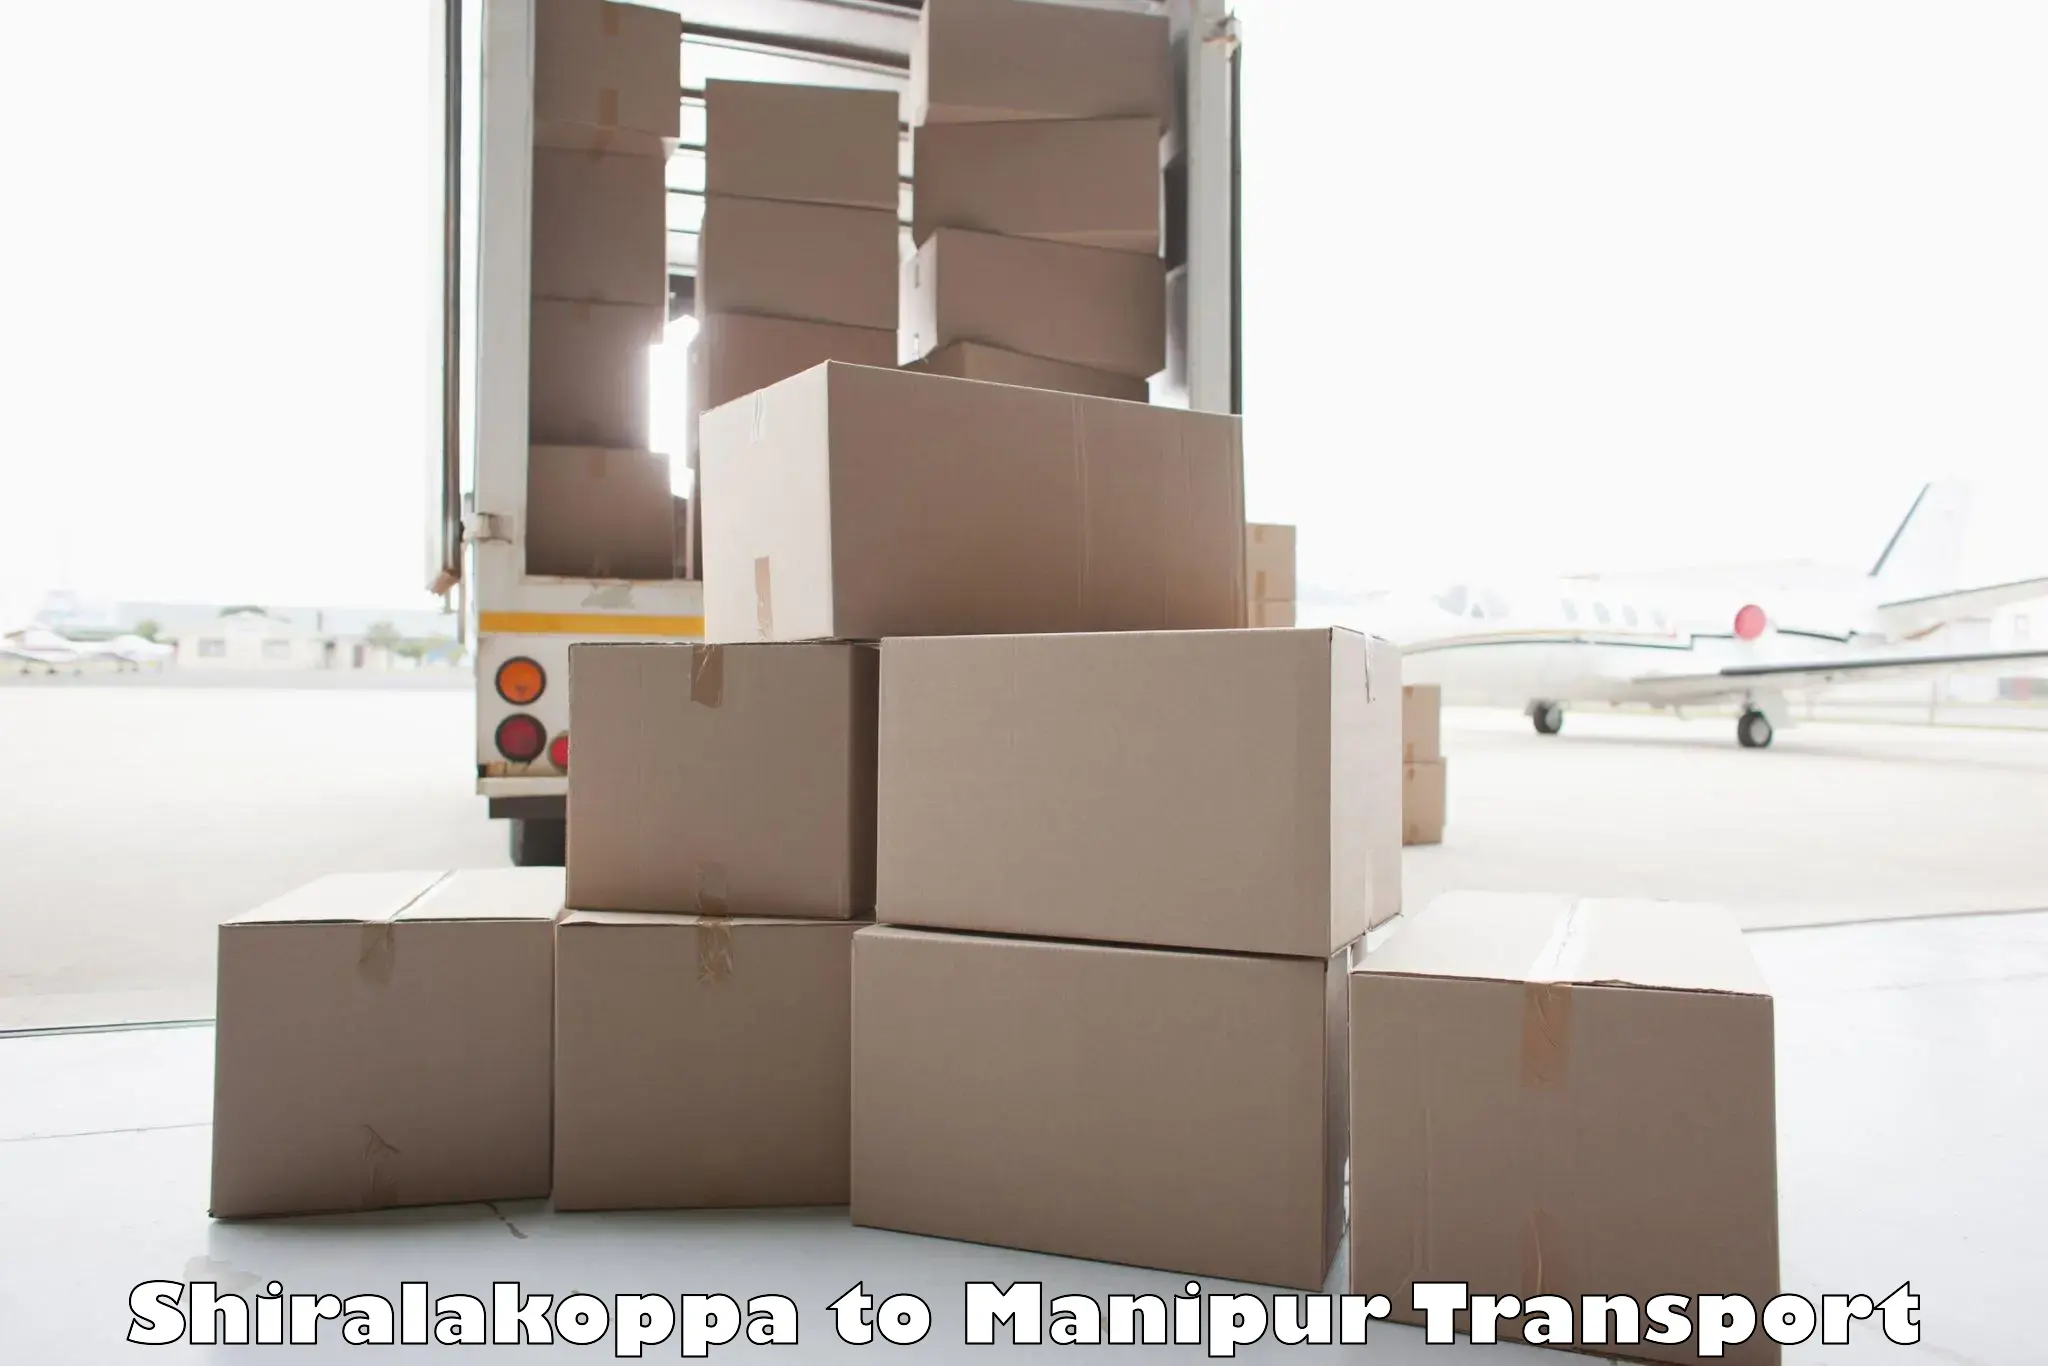 Air freight transport services Shiralakoppa to Manipur